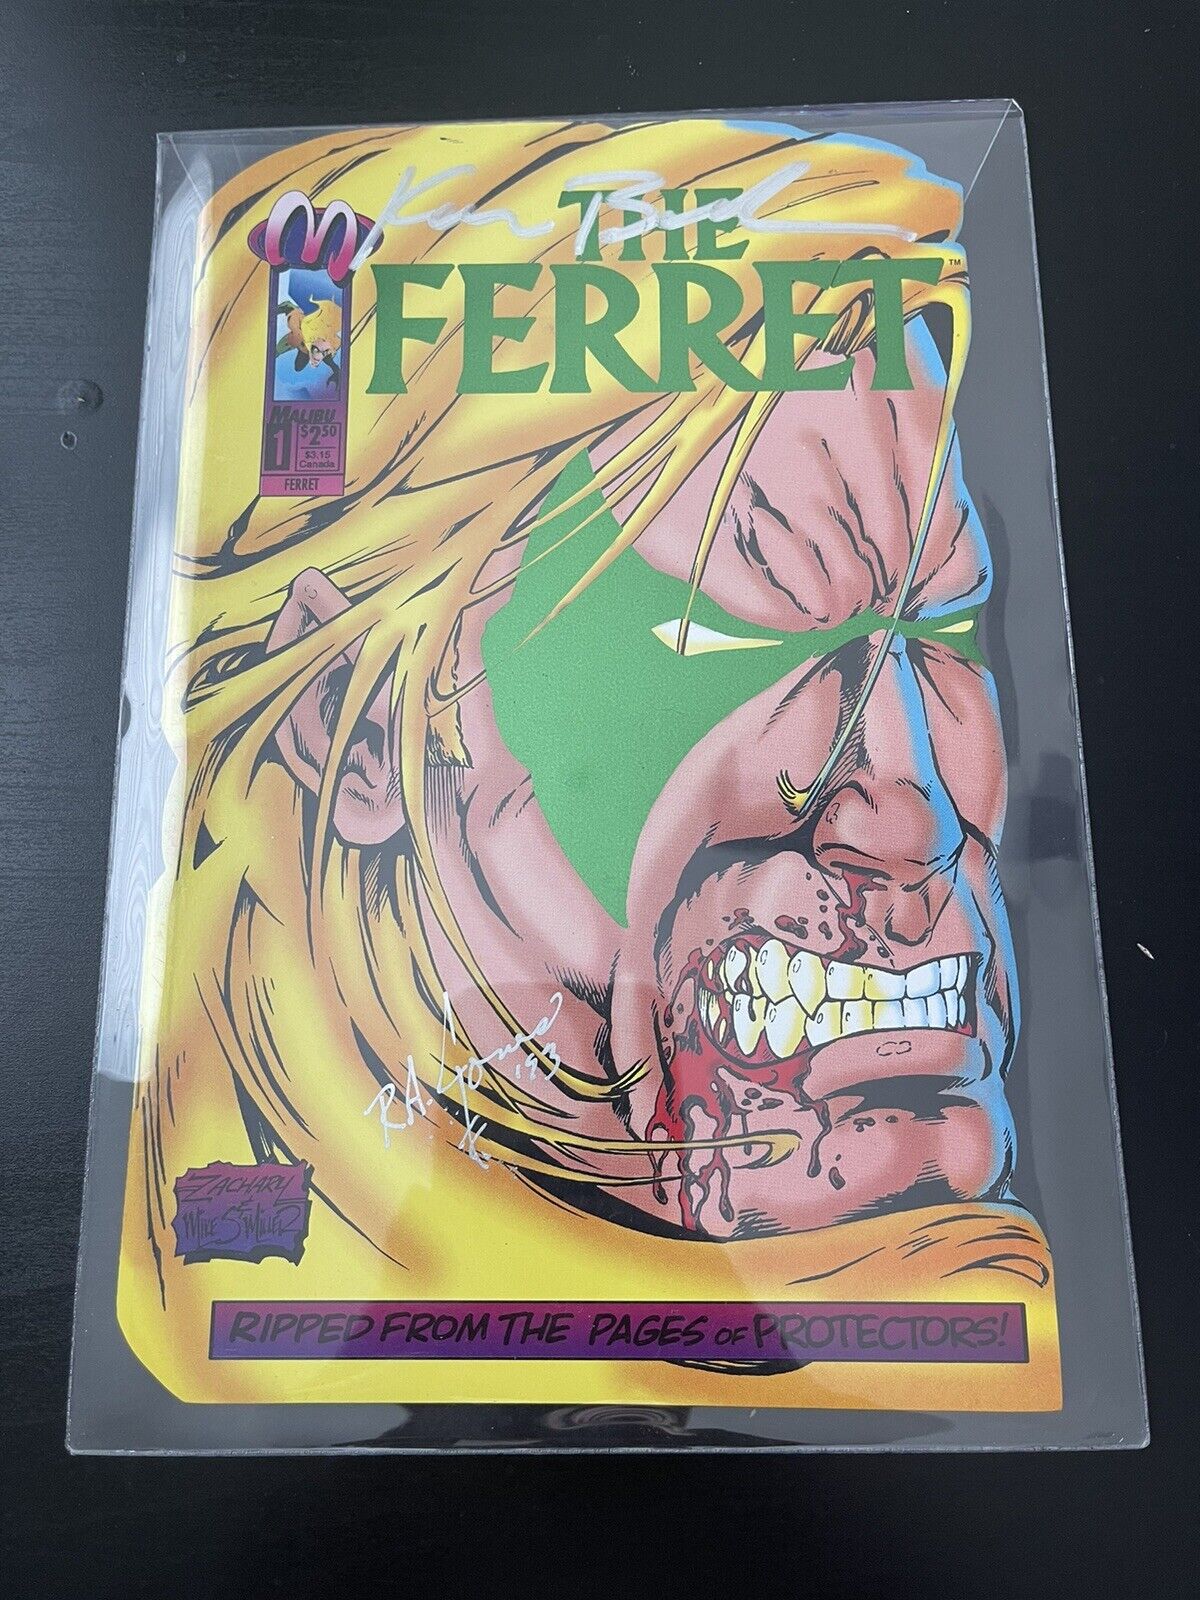 The Ferret #1 (1993) Malibu SIGNED by Author R.A. Jones and Ken Branch